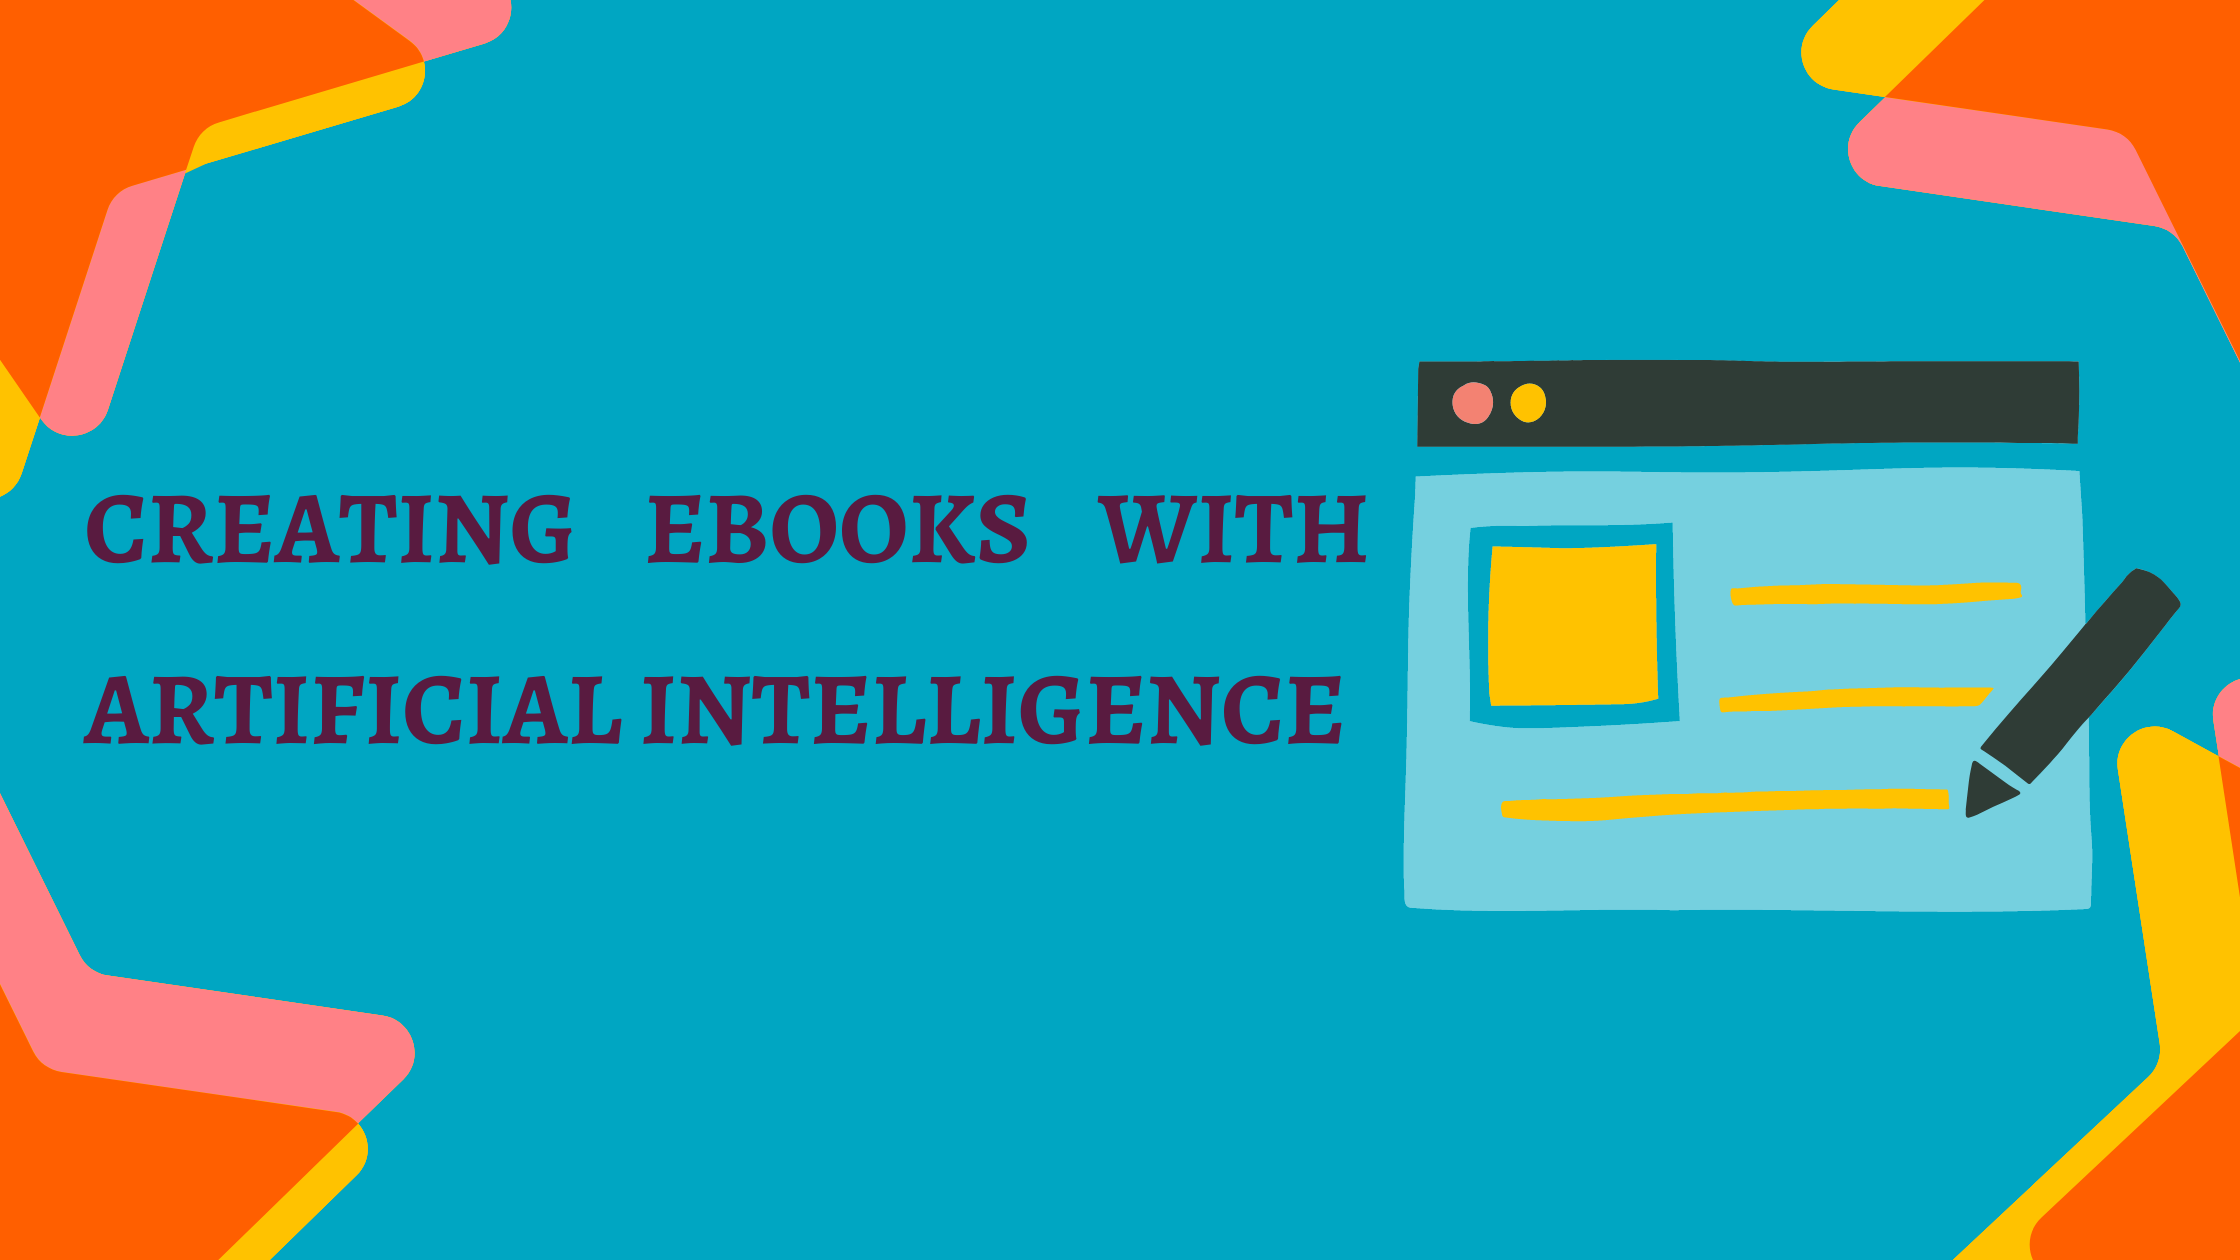 You are currently viewing Ebook Studio Review: Creating Ebooks with Artificial Intelligence